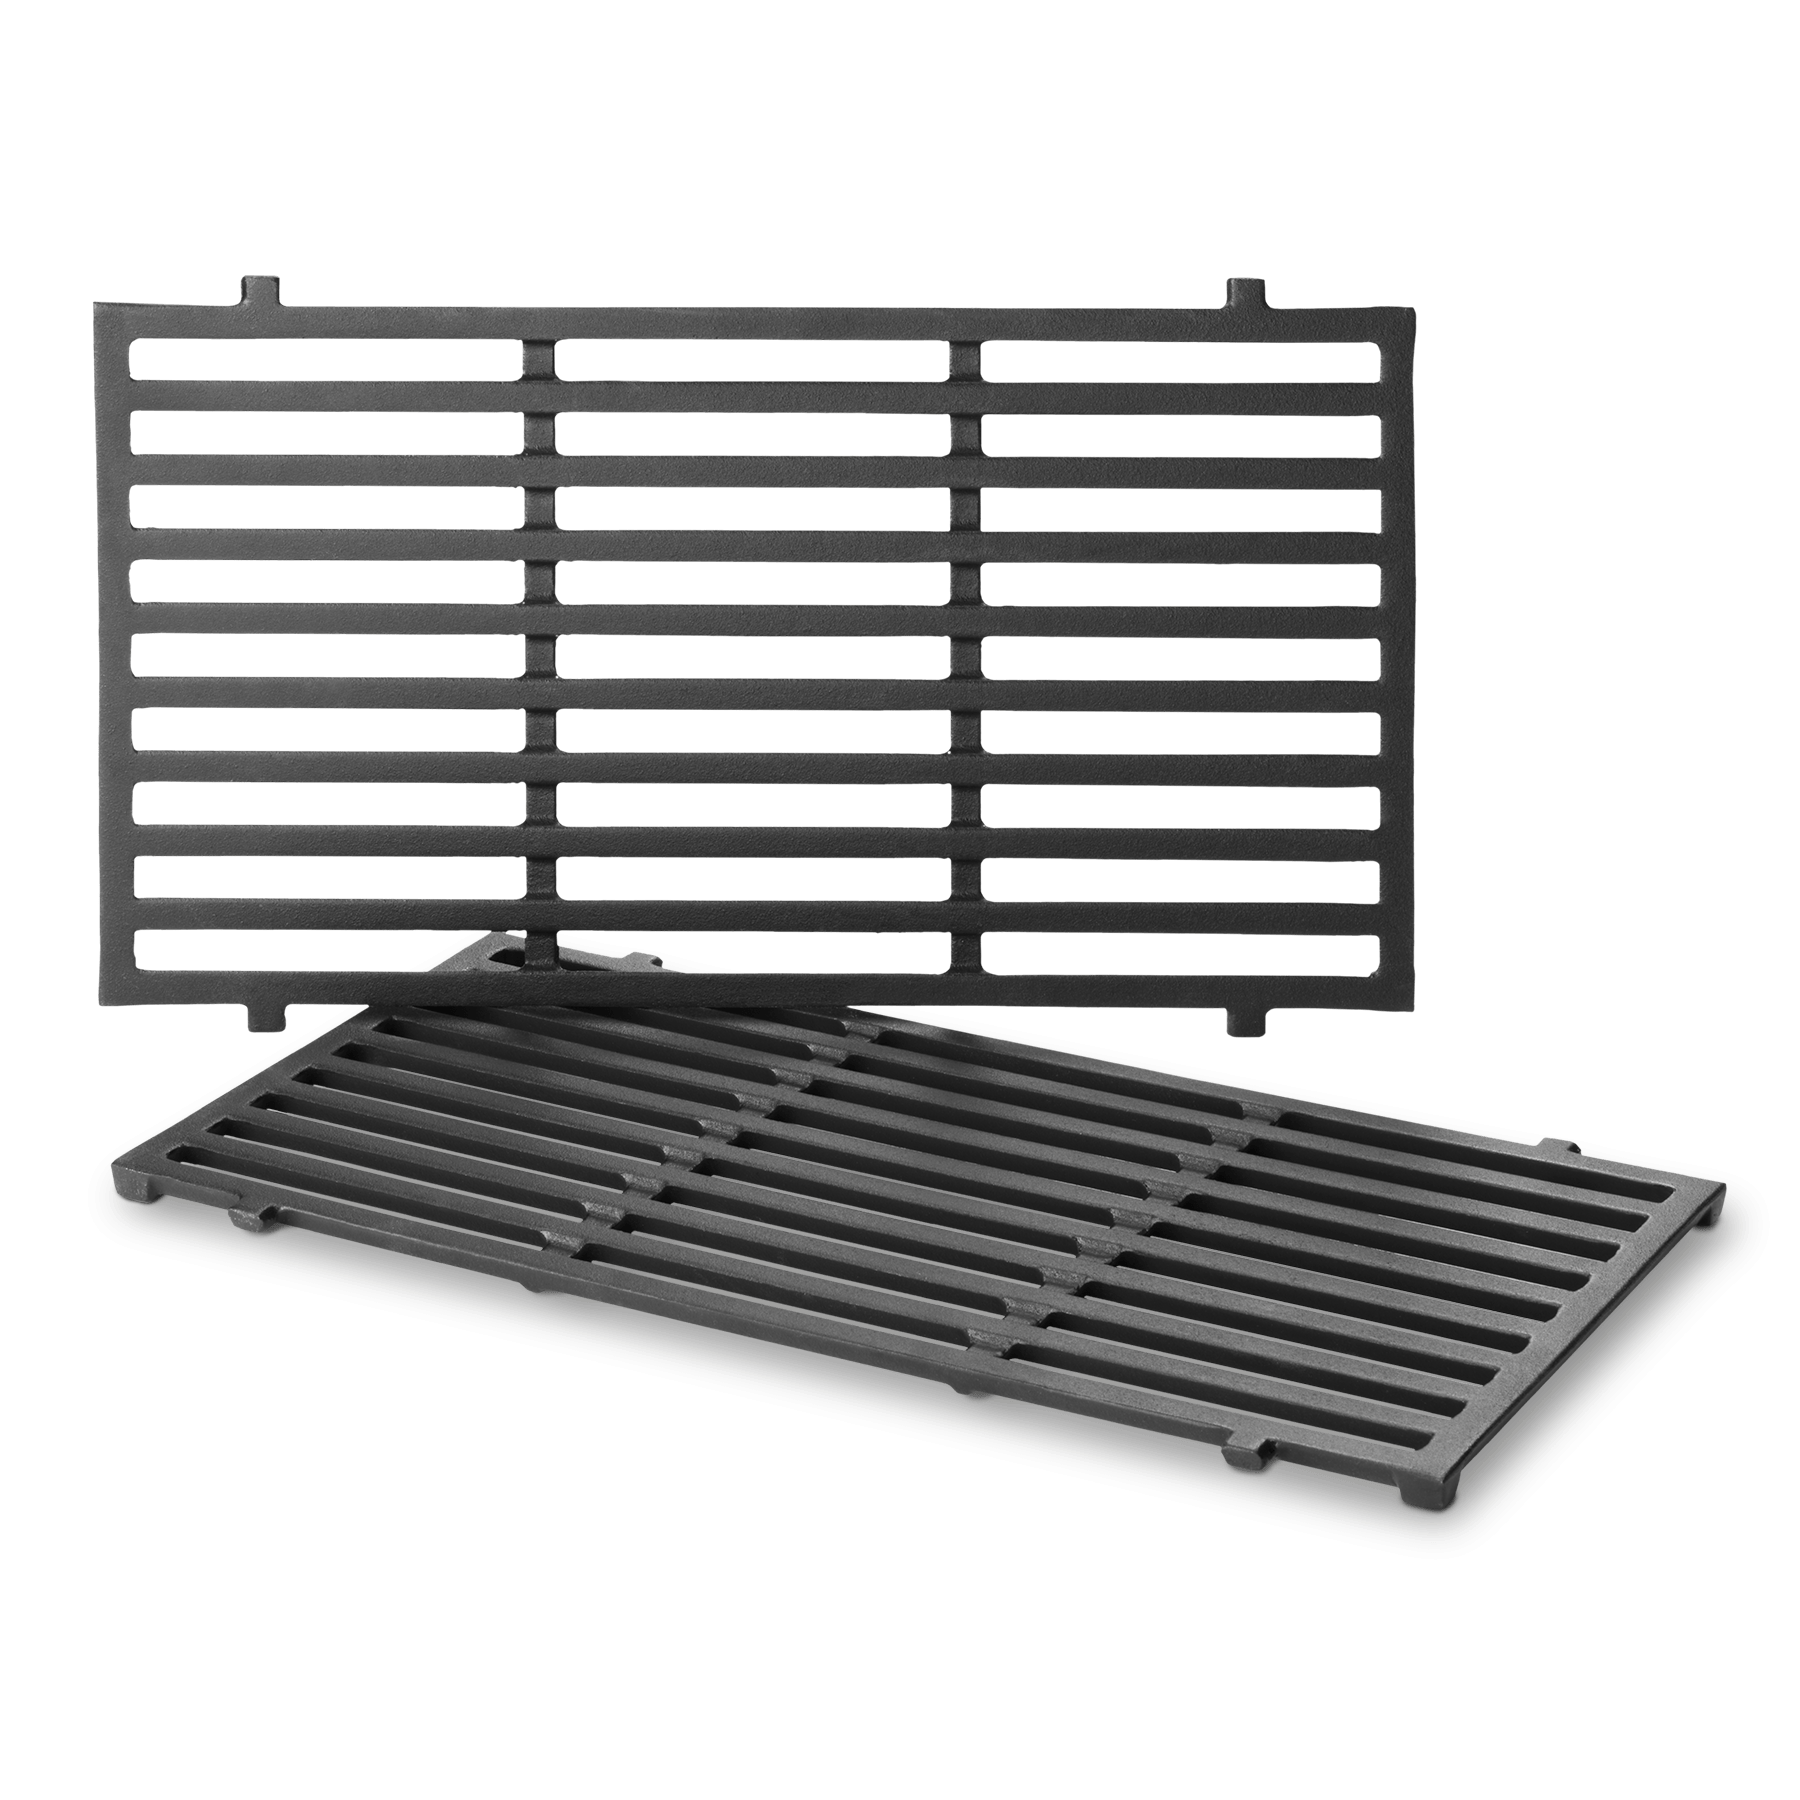 Replace Weber 7639 Genesis Gold B&C 17.3 x 11.8 Genesis 1000-3500 Grill Grates Replacement for Silver C SHINESTAR 7639 Stainless Steel Cooking Grates for Weber Spirit 300 Series Genesis Silver B